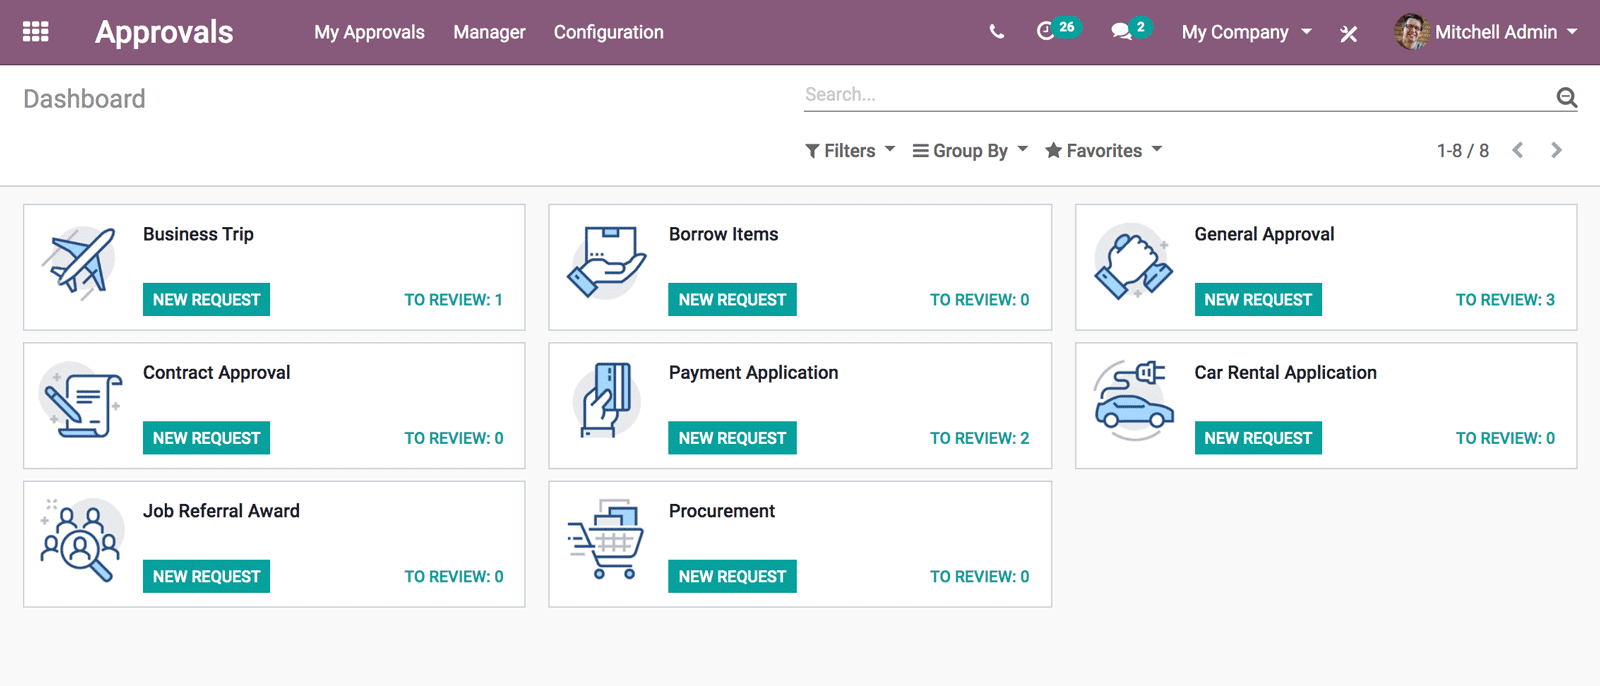 Odoo has provided this application to manage approval requests